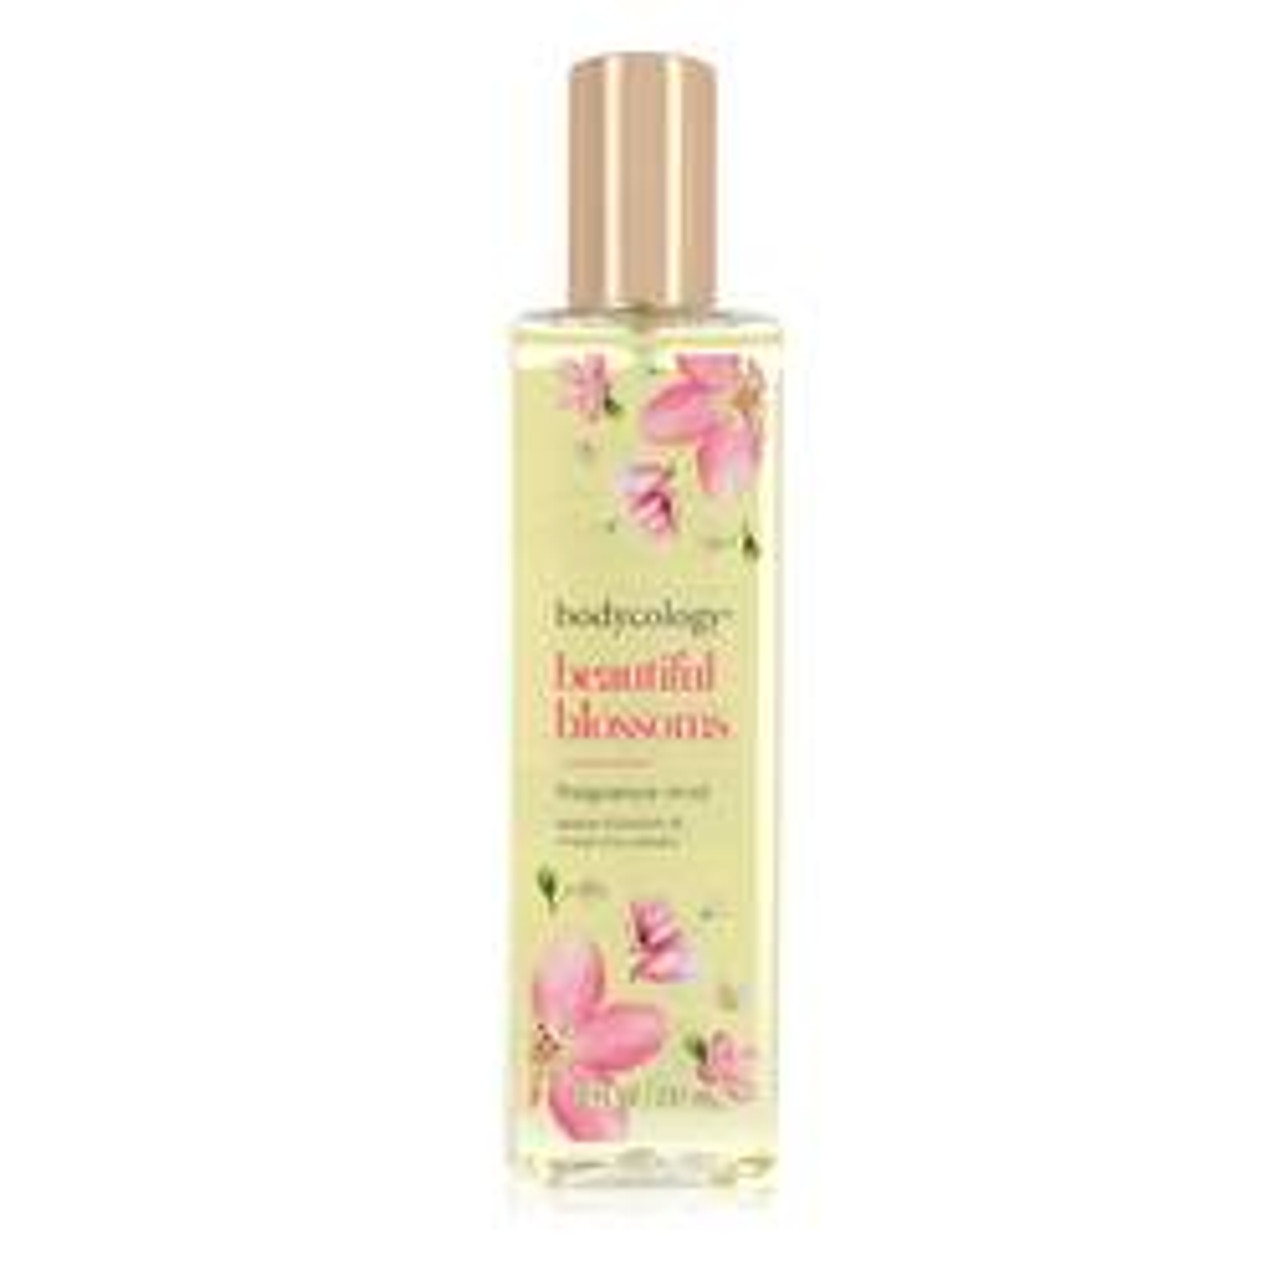 Bodycology Beautiful Blossoms Perfume By Bodycology Fragrance Mist Spray 8 oz for Women - [From 23.00 - Choose pk Qty ] - *Ships from Miami